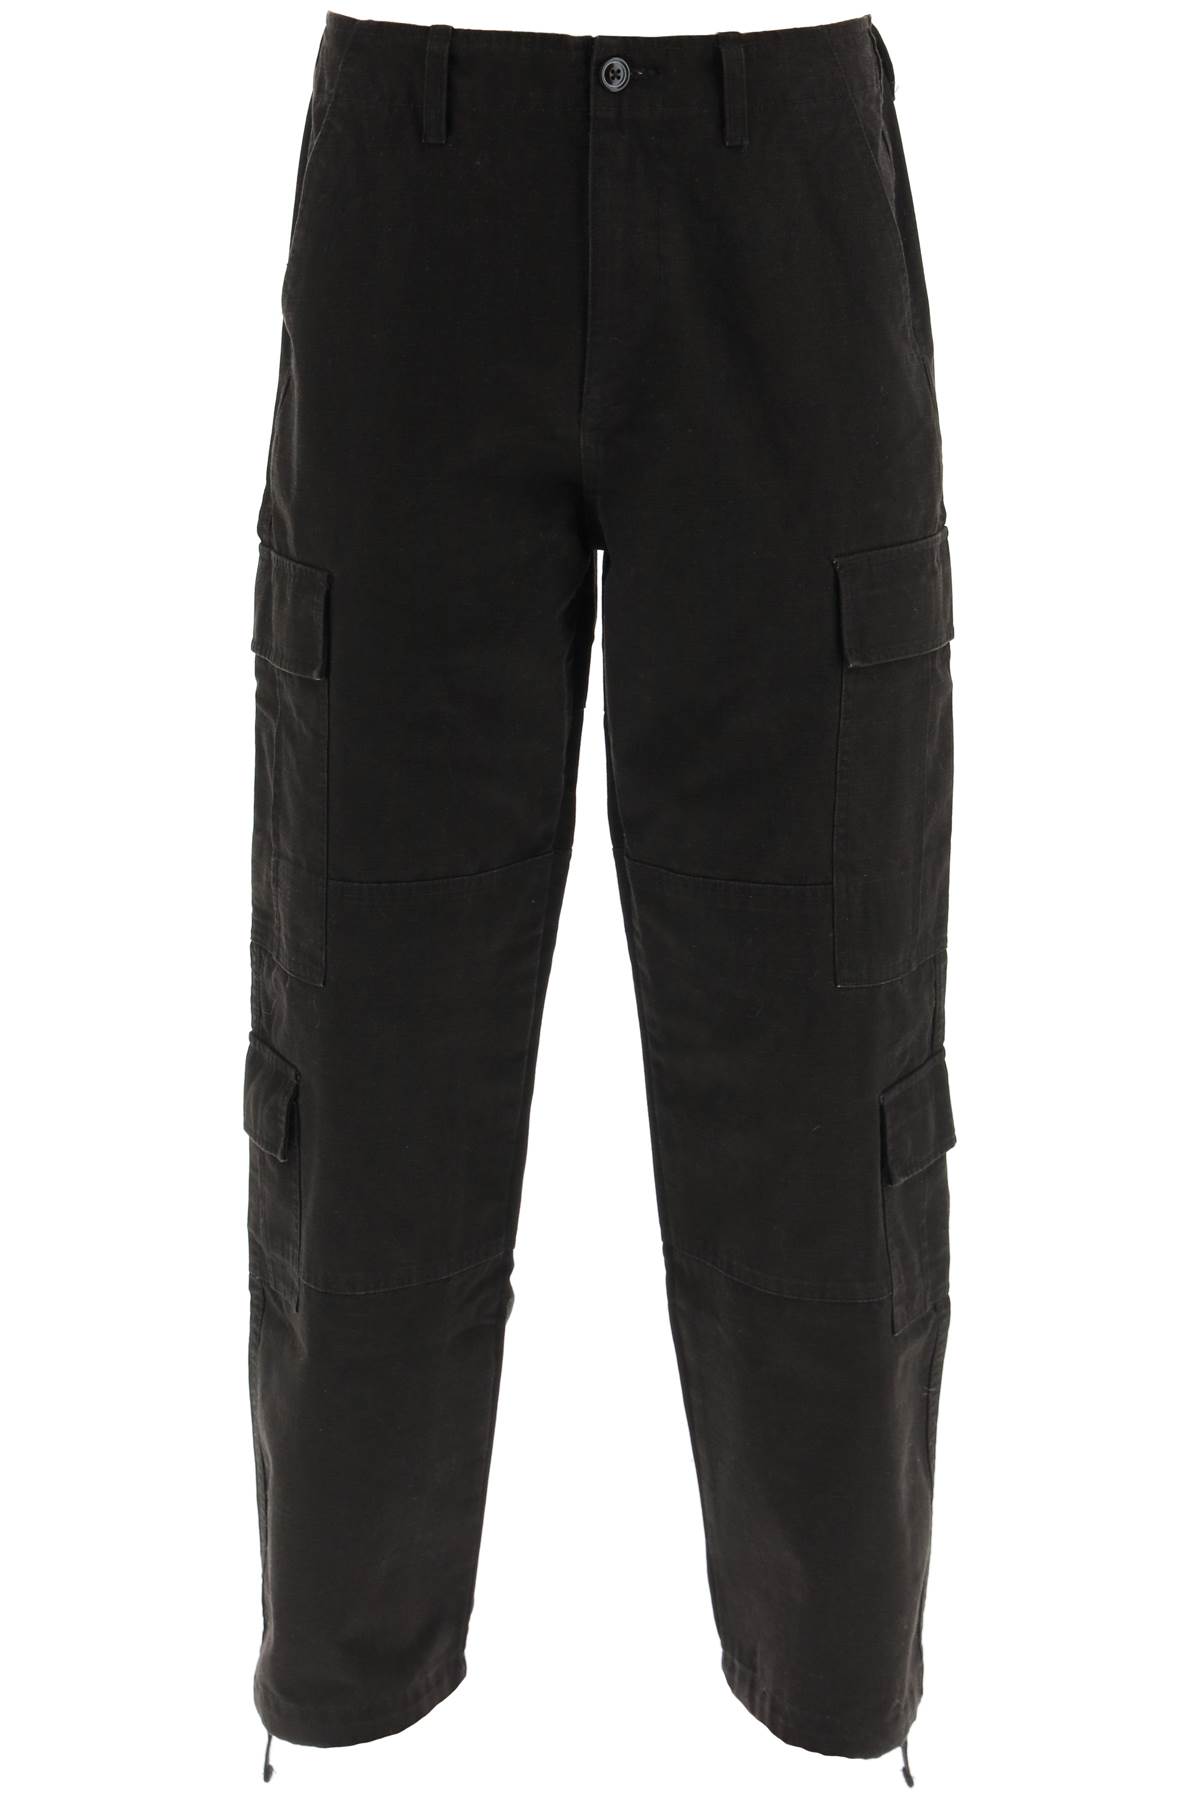 Stussy Cotton Ripstop Cargo Trousers